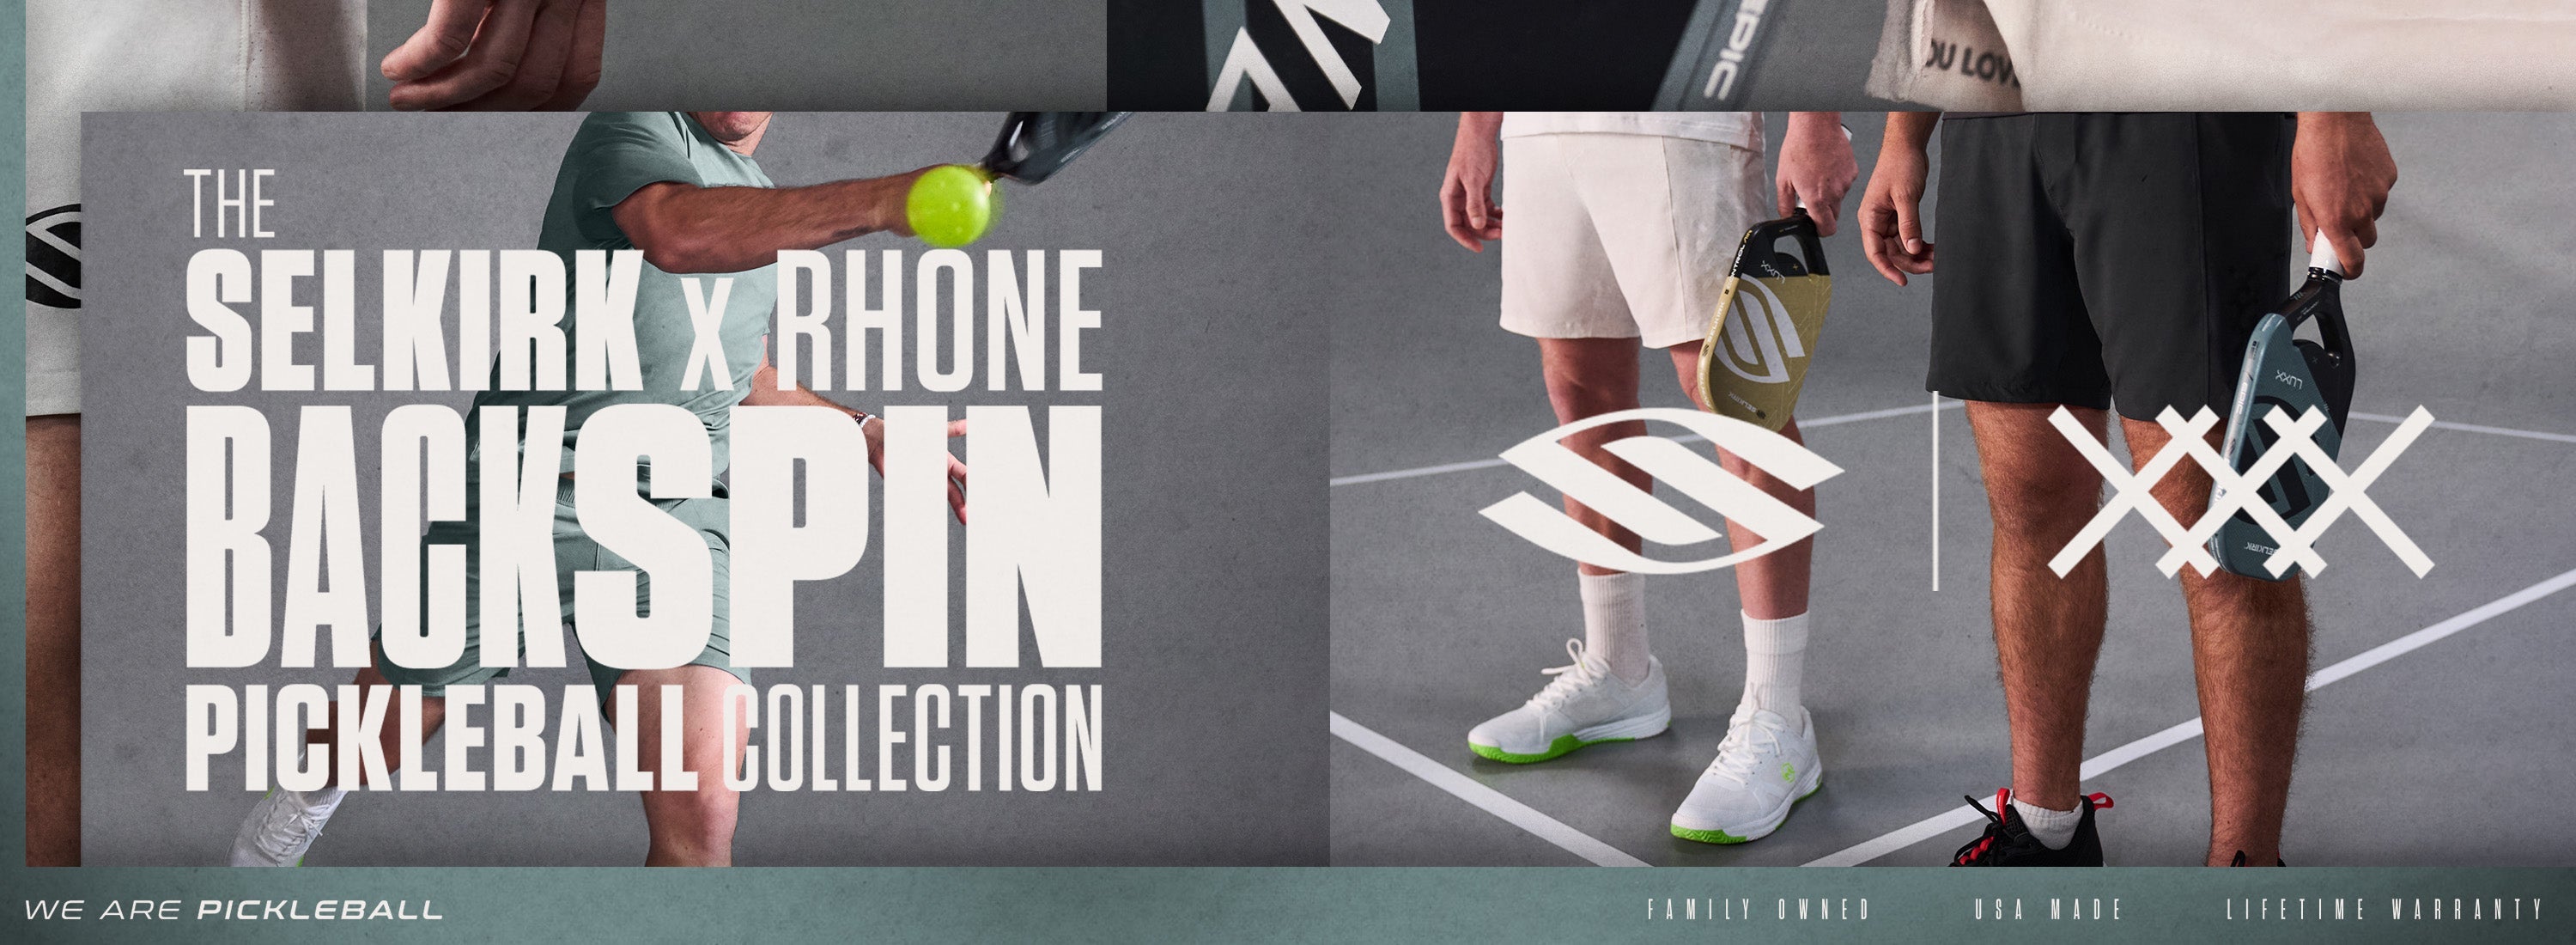 Rhone men's clothing and Selkirk Sport Backspin Collection, designed for pickleball players. The collection includes Selkirk pickleball paddles, men's clothing, shorts, and t-shirts for your next pickleball match.